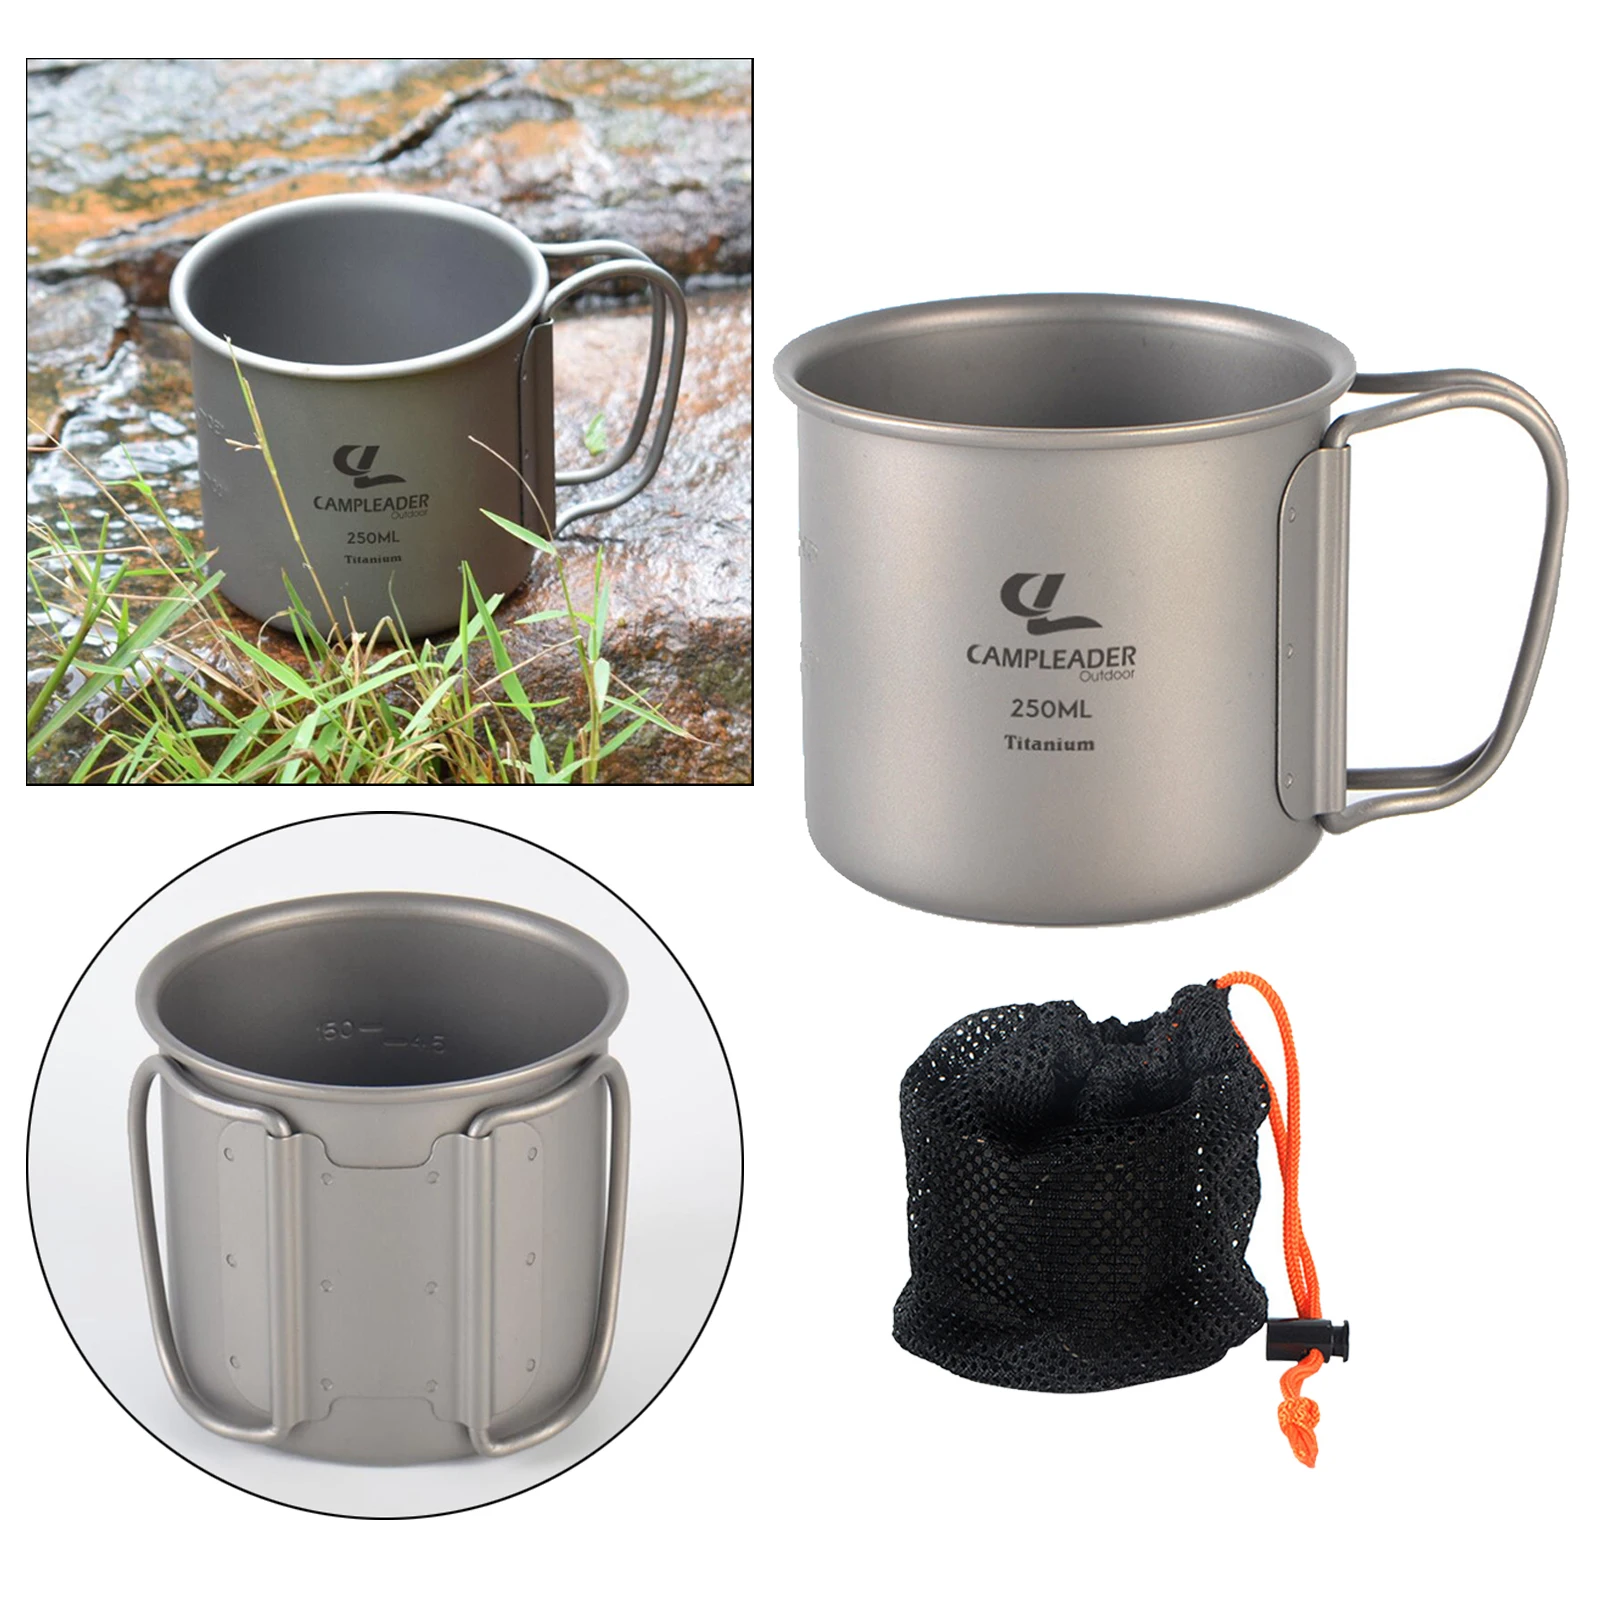 250ml Titanium Collapsible Handle Camping Mug Hiking Portable Can be Boiled Drinking Cup Only 40g